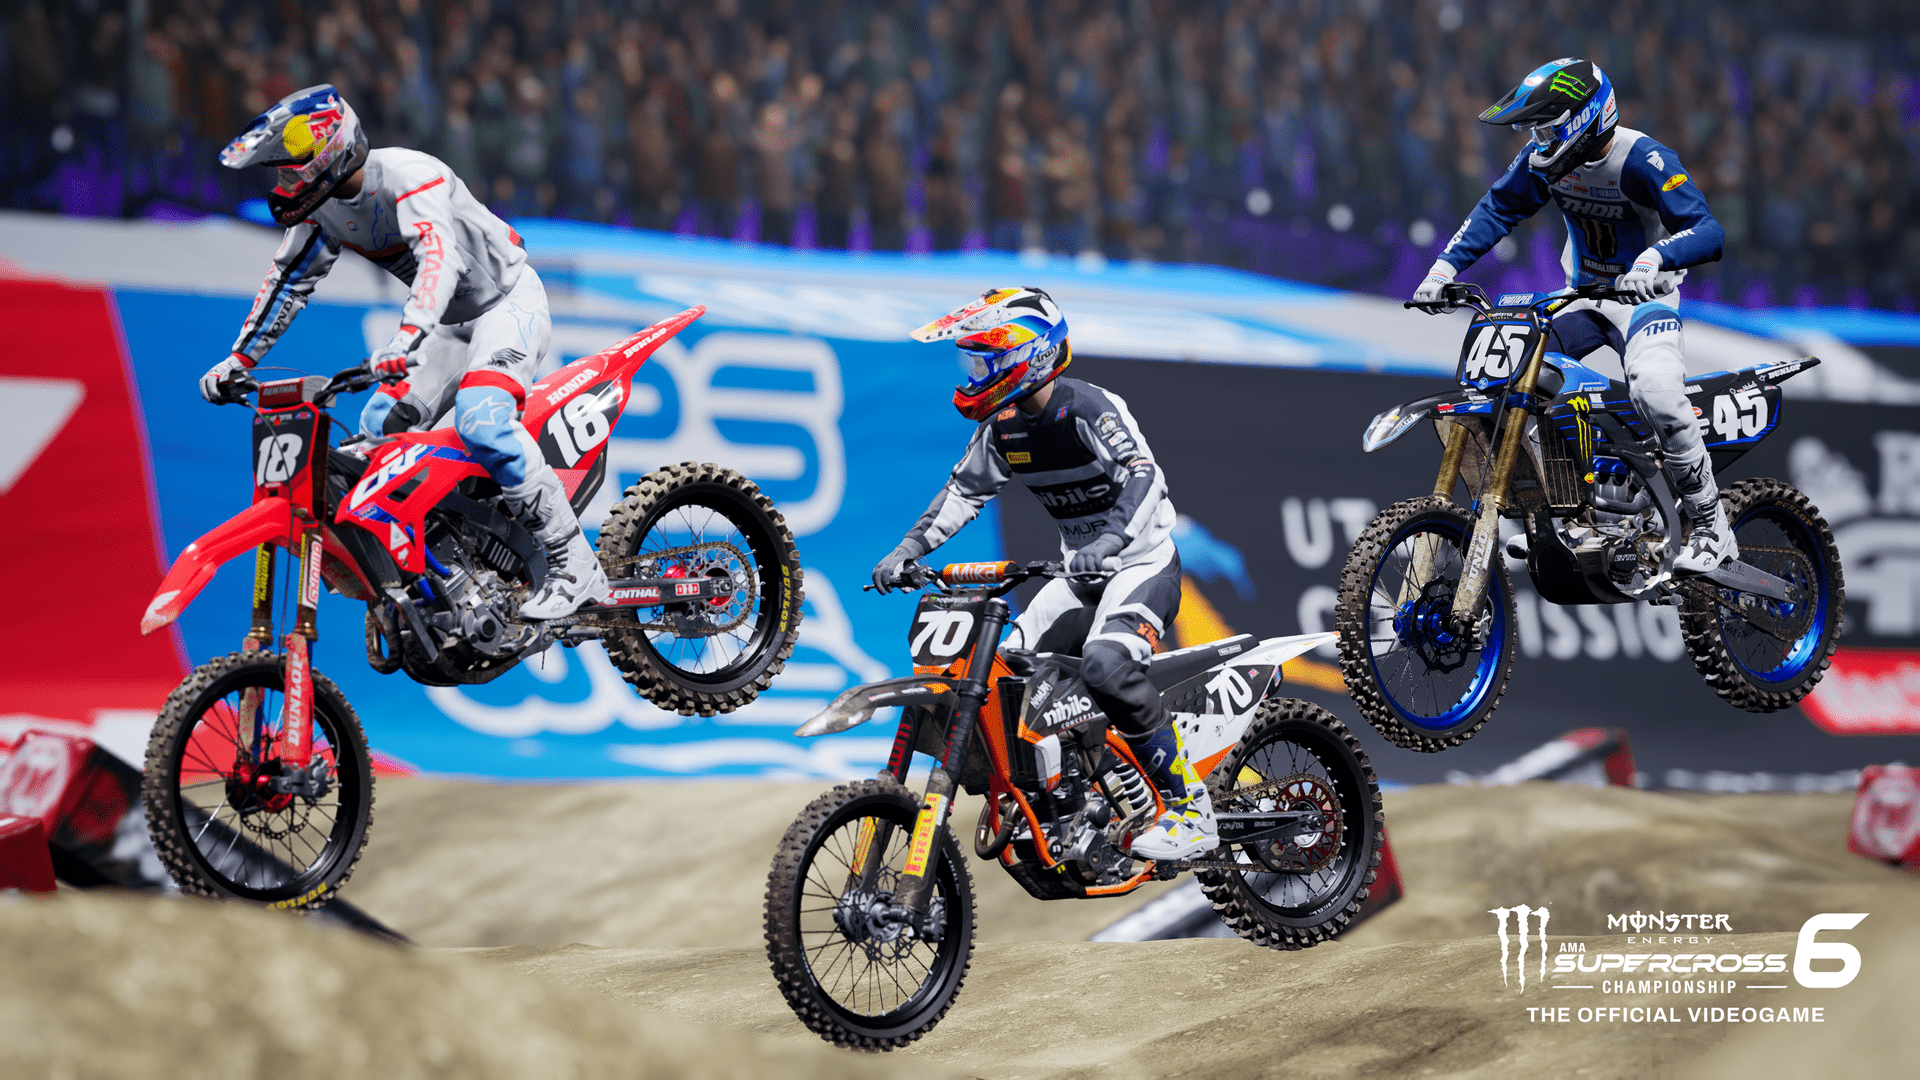 Monster Energy Supercross - The Official Videogame 6 (26)